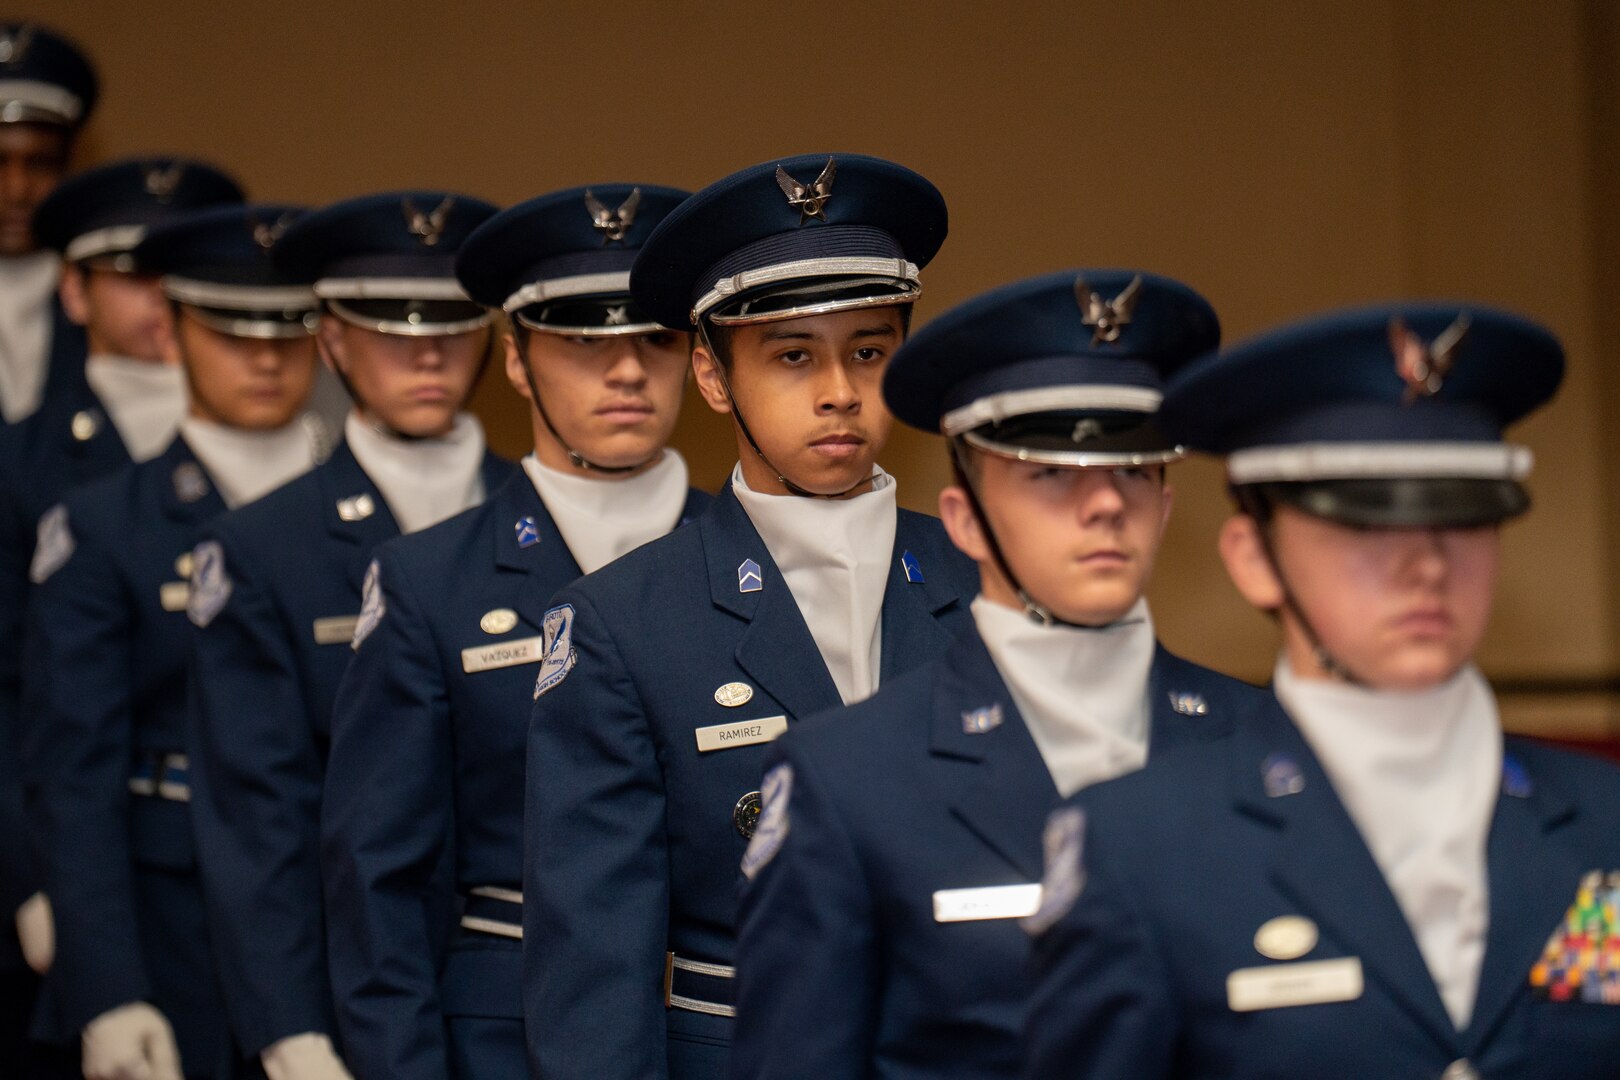 Members of Randolph High School’s AFJROTC Saber Team perform during the Air Force Recruiting annual Operation Blue Suit Arrival Ceremony March 21, 2023, at Joint Base San Antonio-Randolph, Texas.